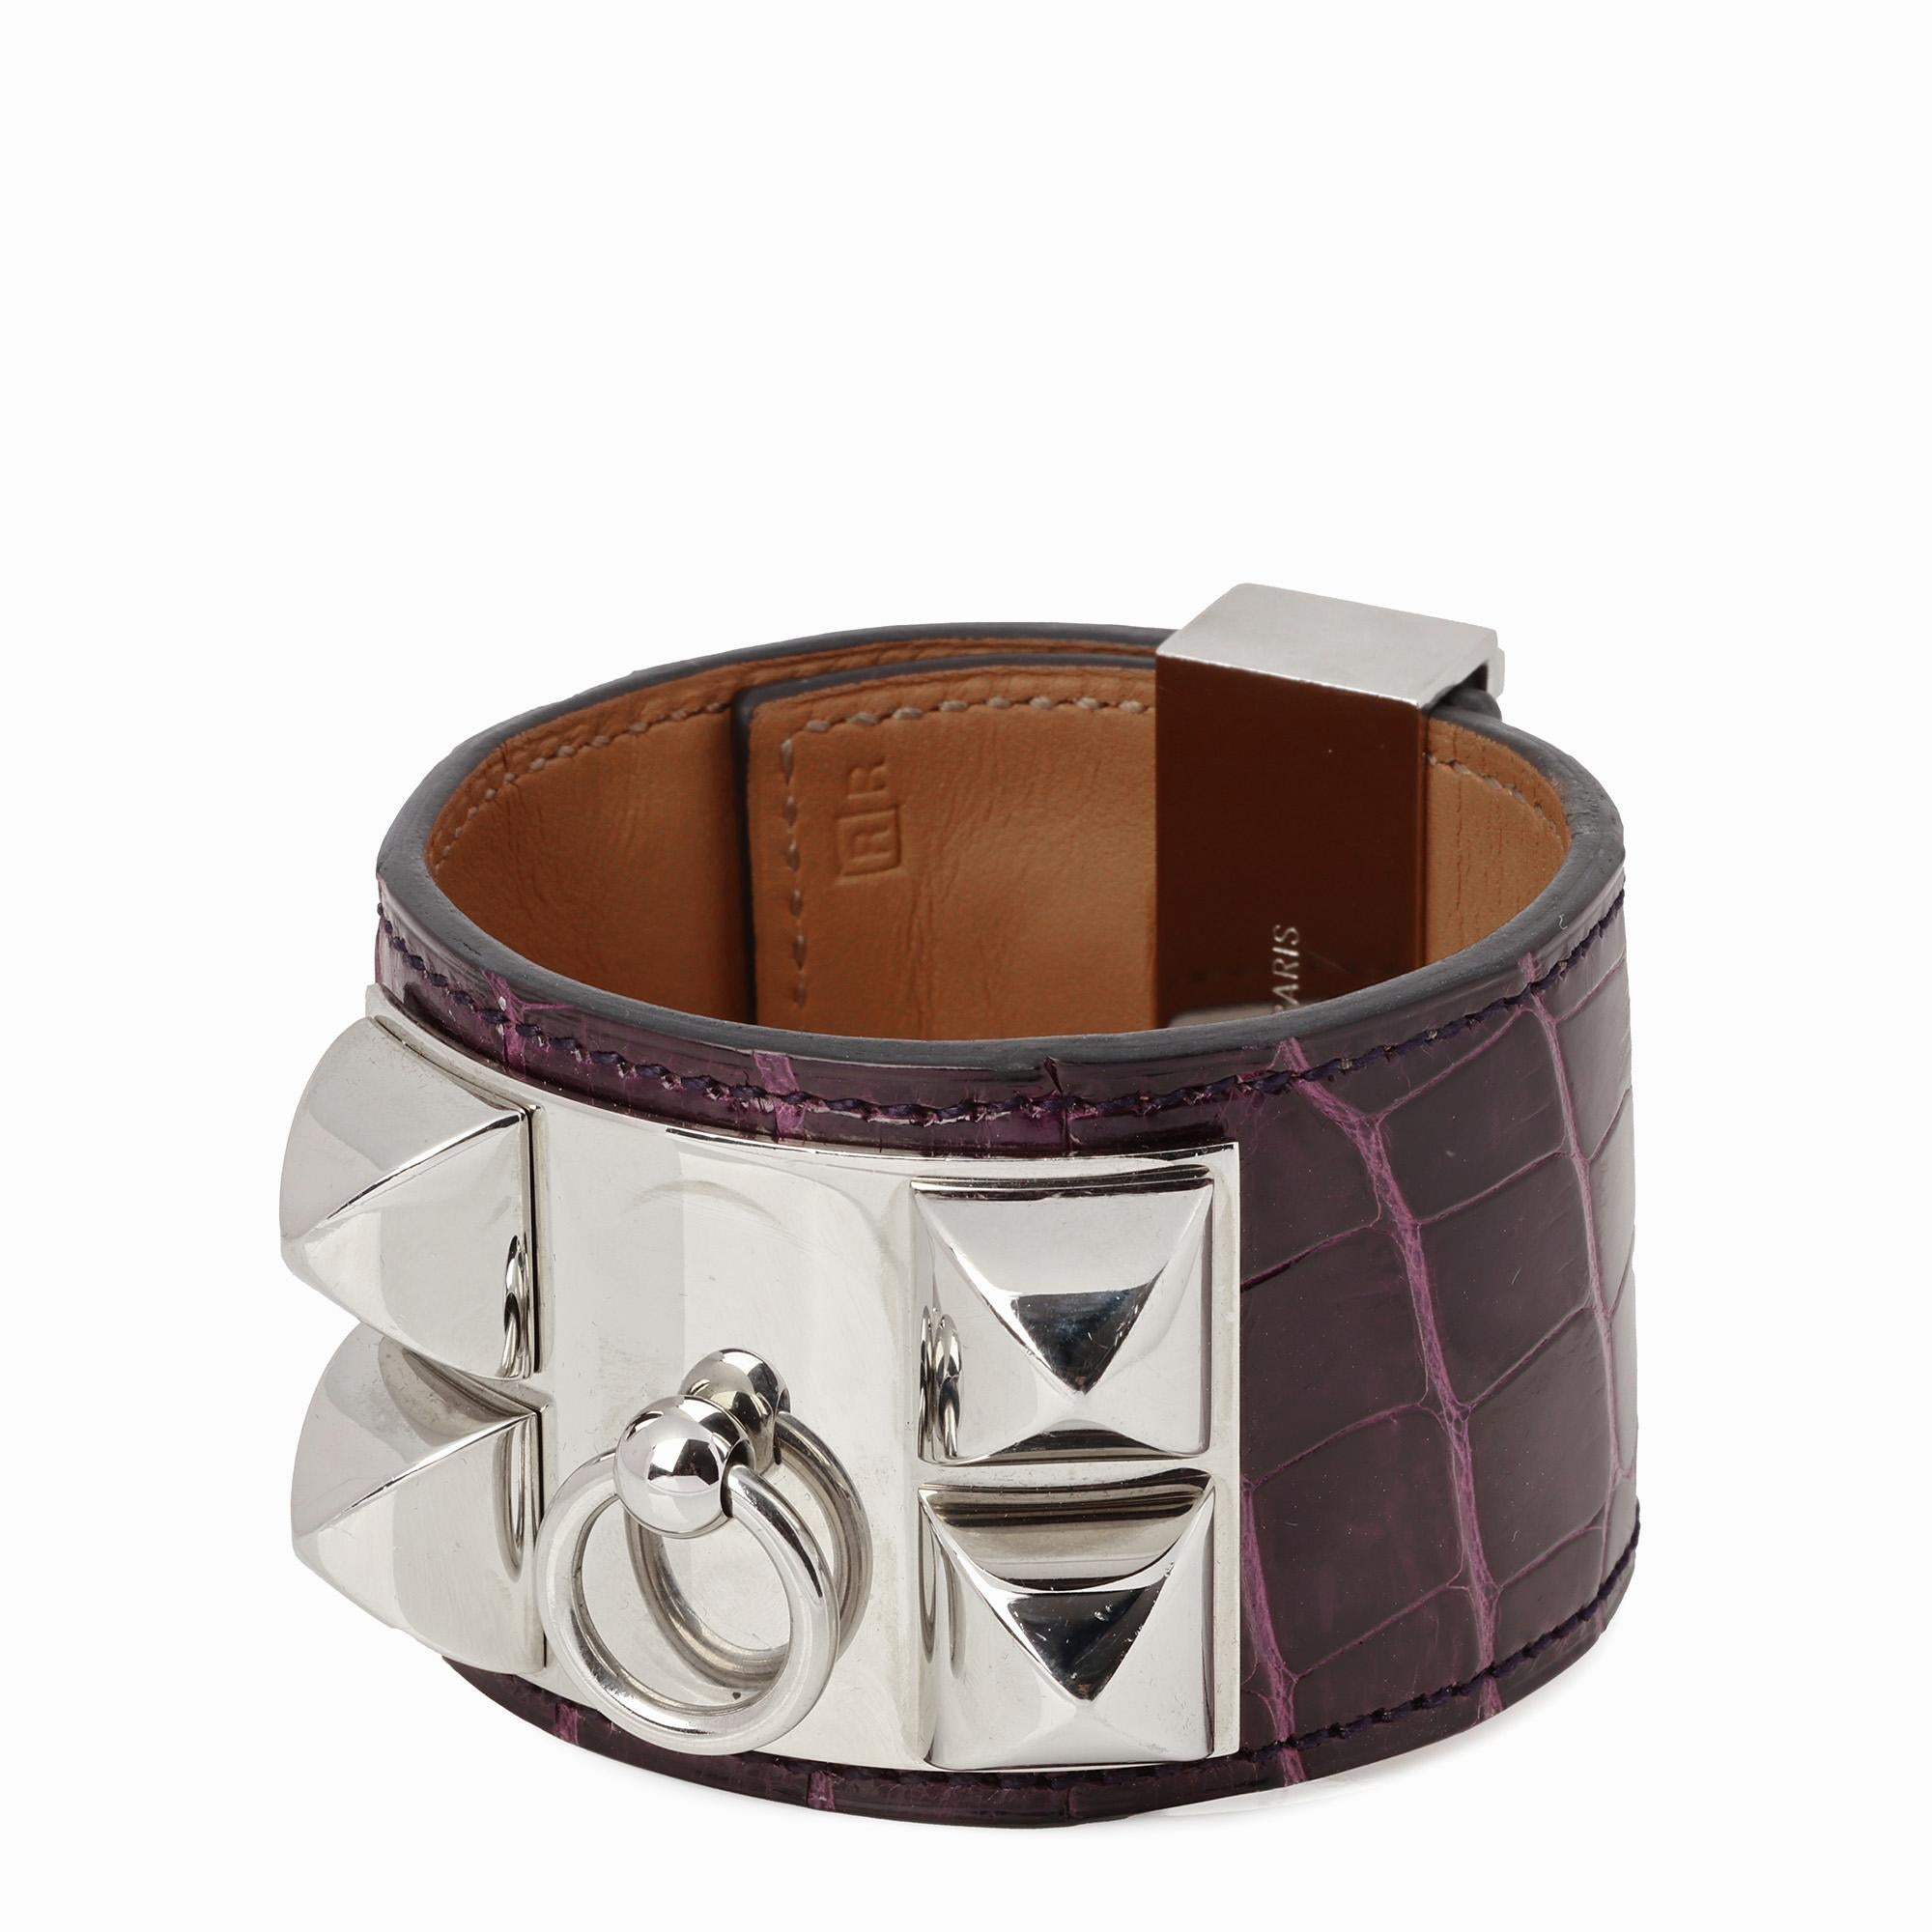 Hermès AMETHYST SHINY MISSISSIPPIENSIS ALLIGATOR LEATHER COLLIER DE CHIEN T2

CONDITION NOTES
The exterior is in excellent condition with light signs of use.
The hardware is in excellent condition with light signs of use. The back pin has